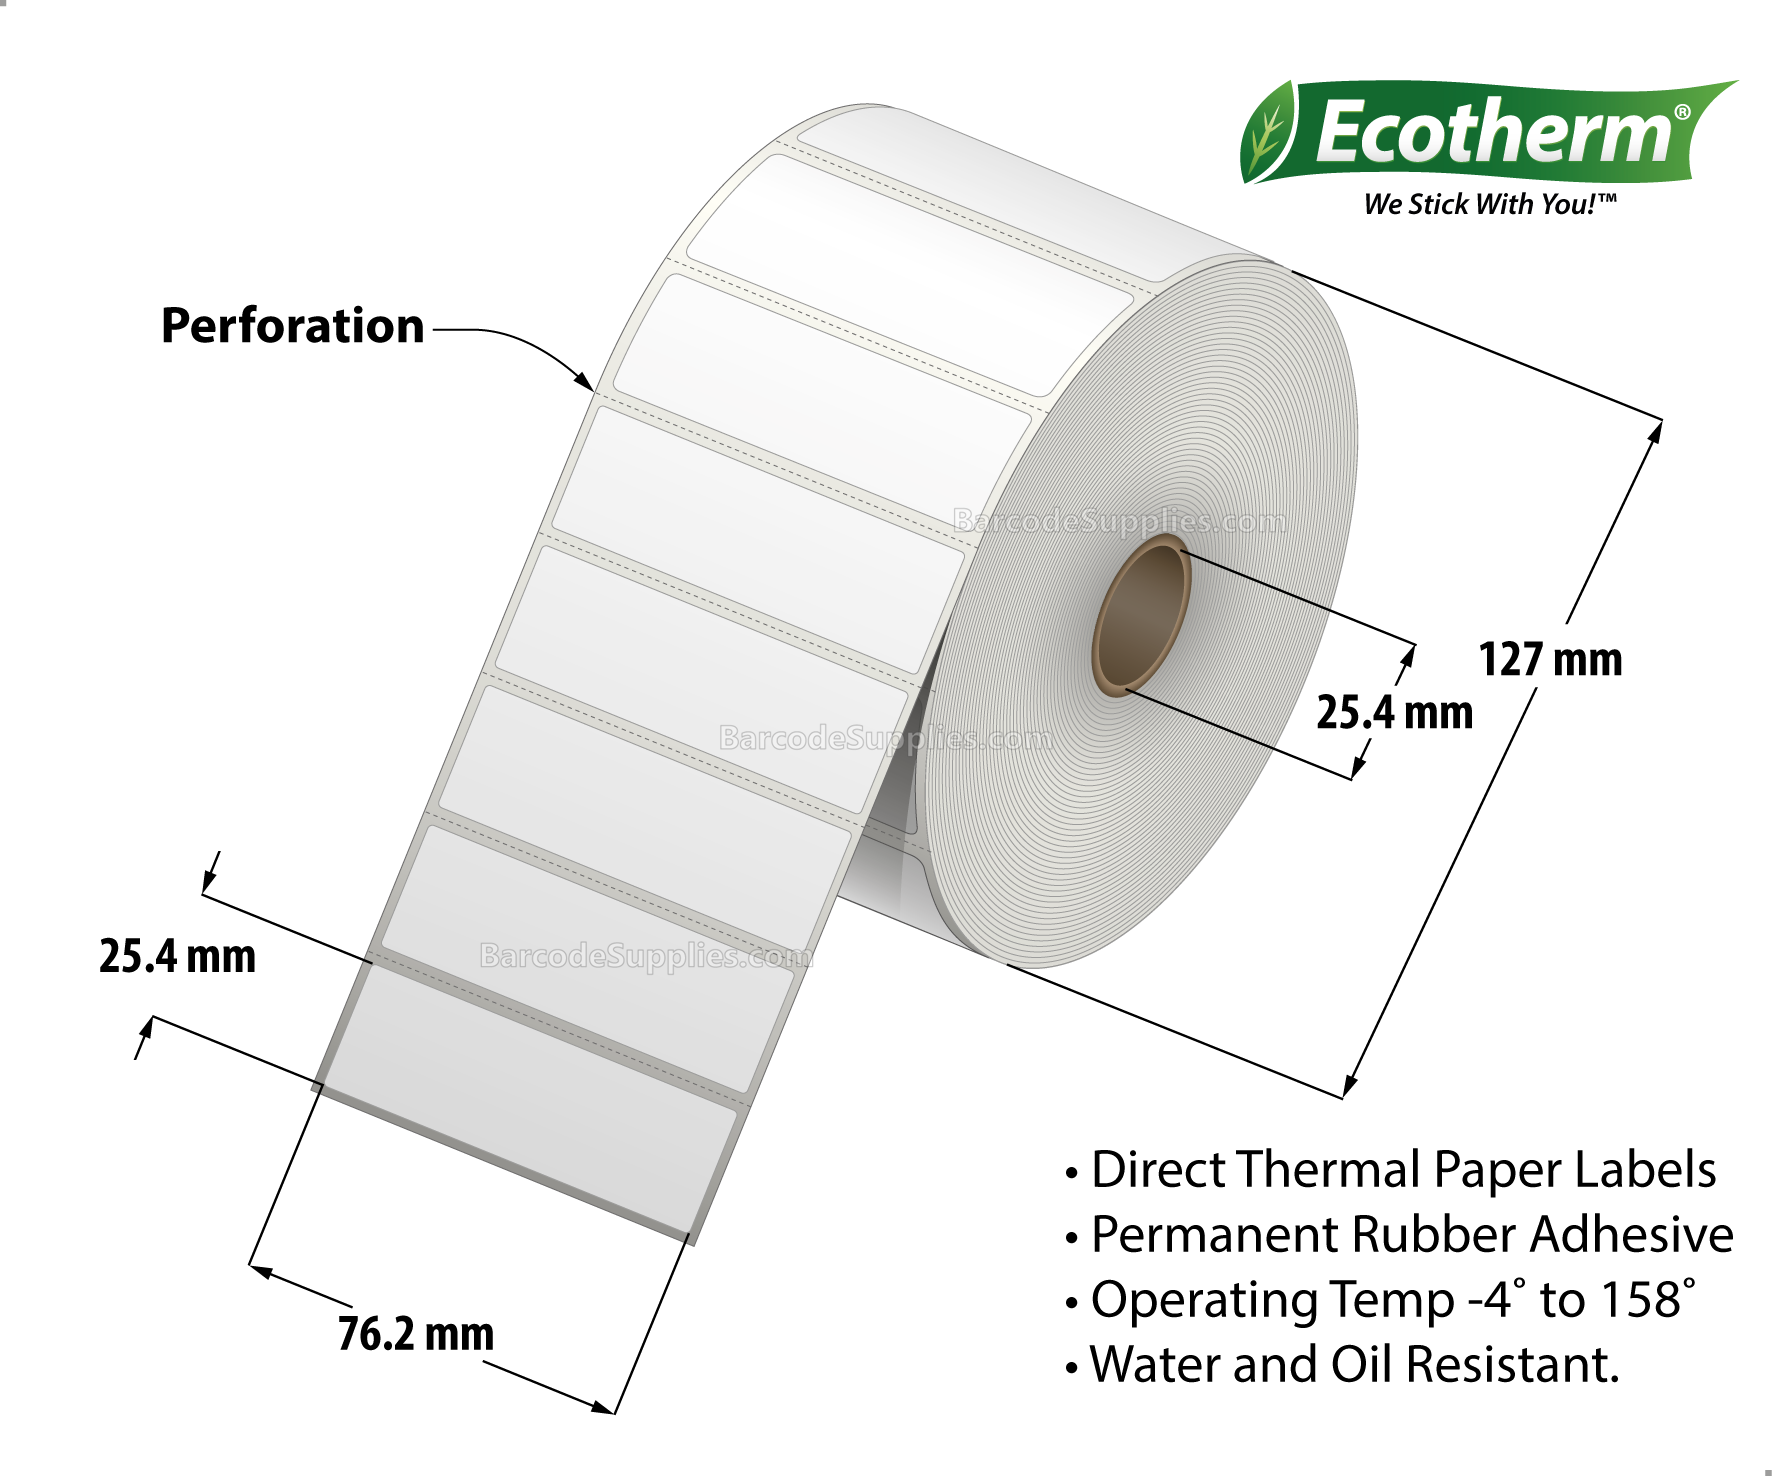 3 x 1 Direct Thermal White Labels With Rubber Adhesive - Perforated - 2500 Labels Per Roll - Carton Of 6 Rolls - 15000 Labels Total - MPN: ECOTHERM15137-6